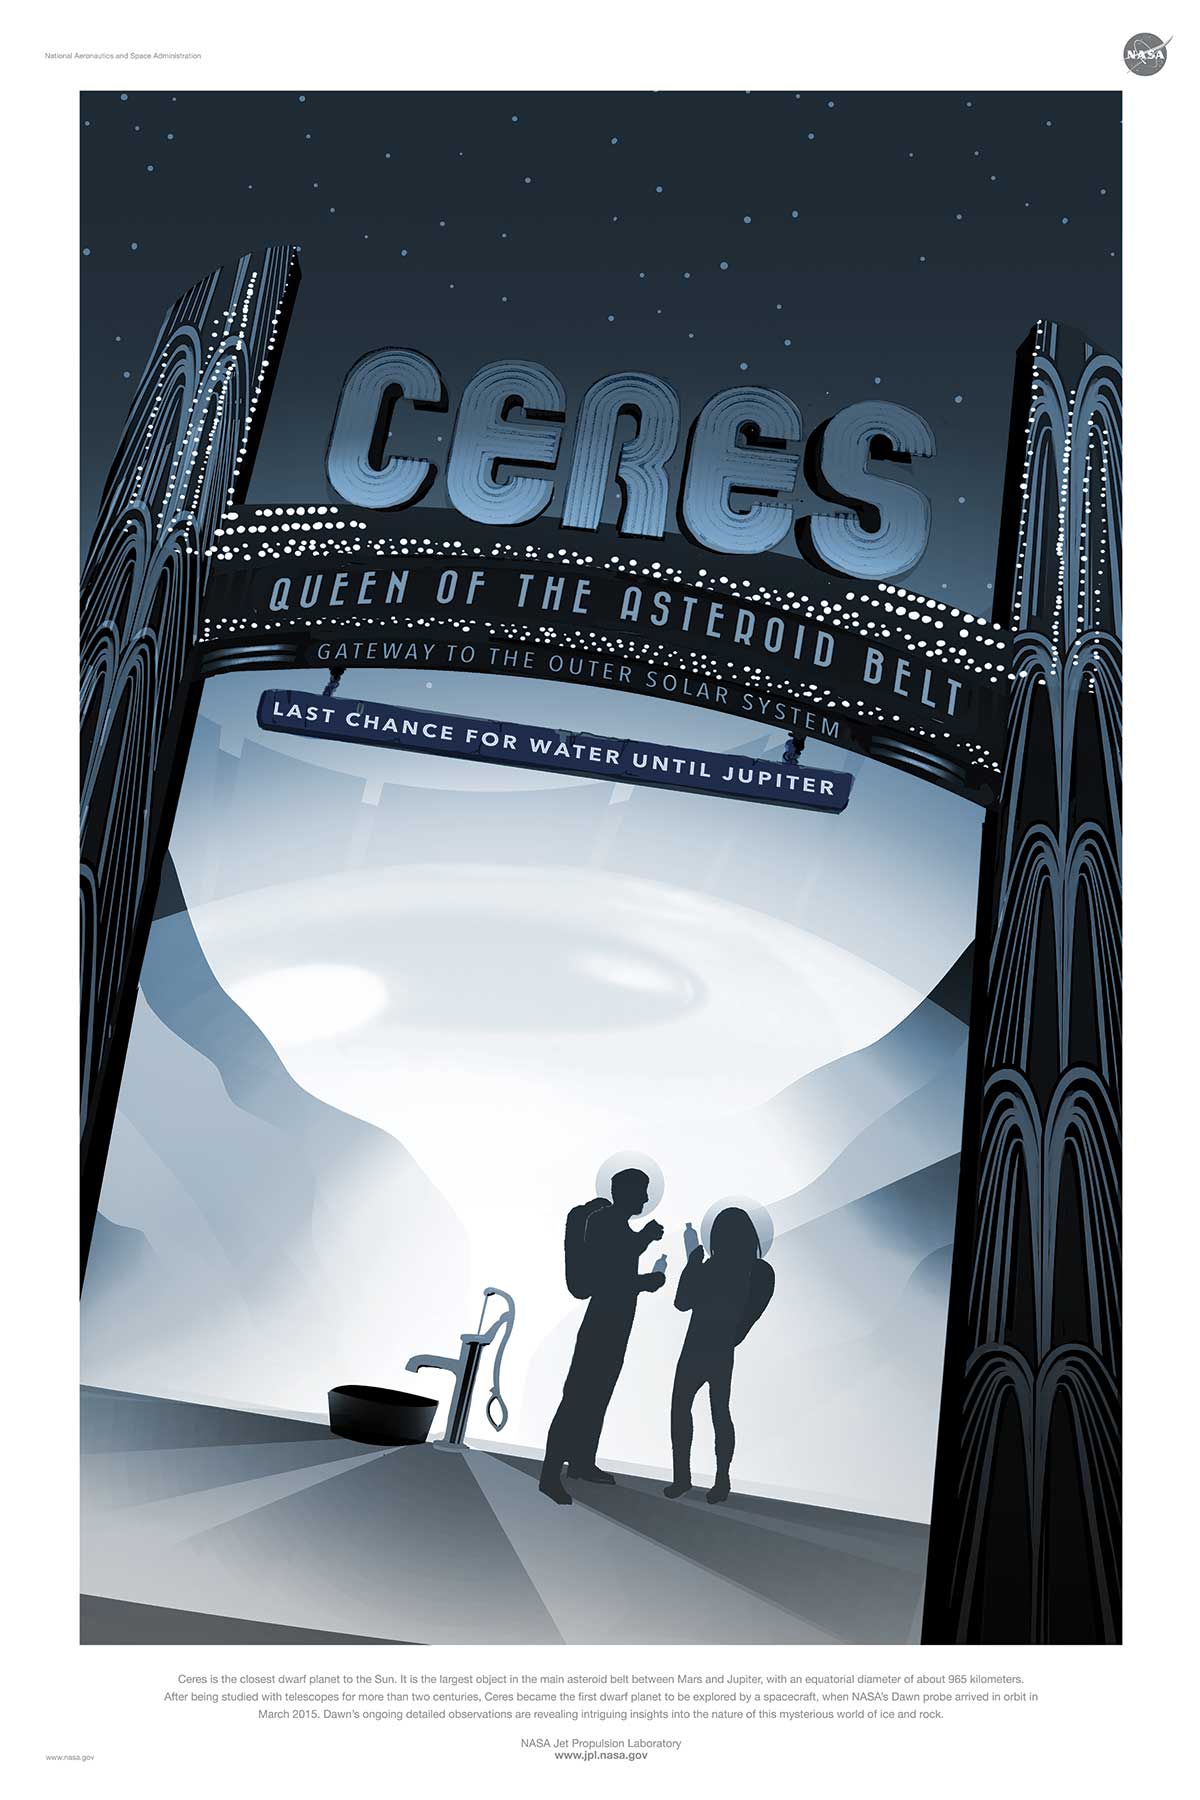 NASA poster promoting space travel to Ceres